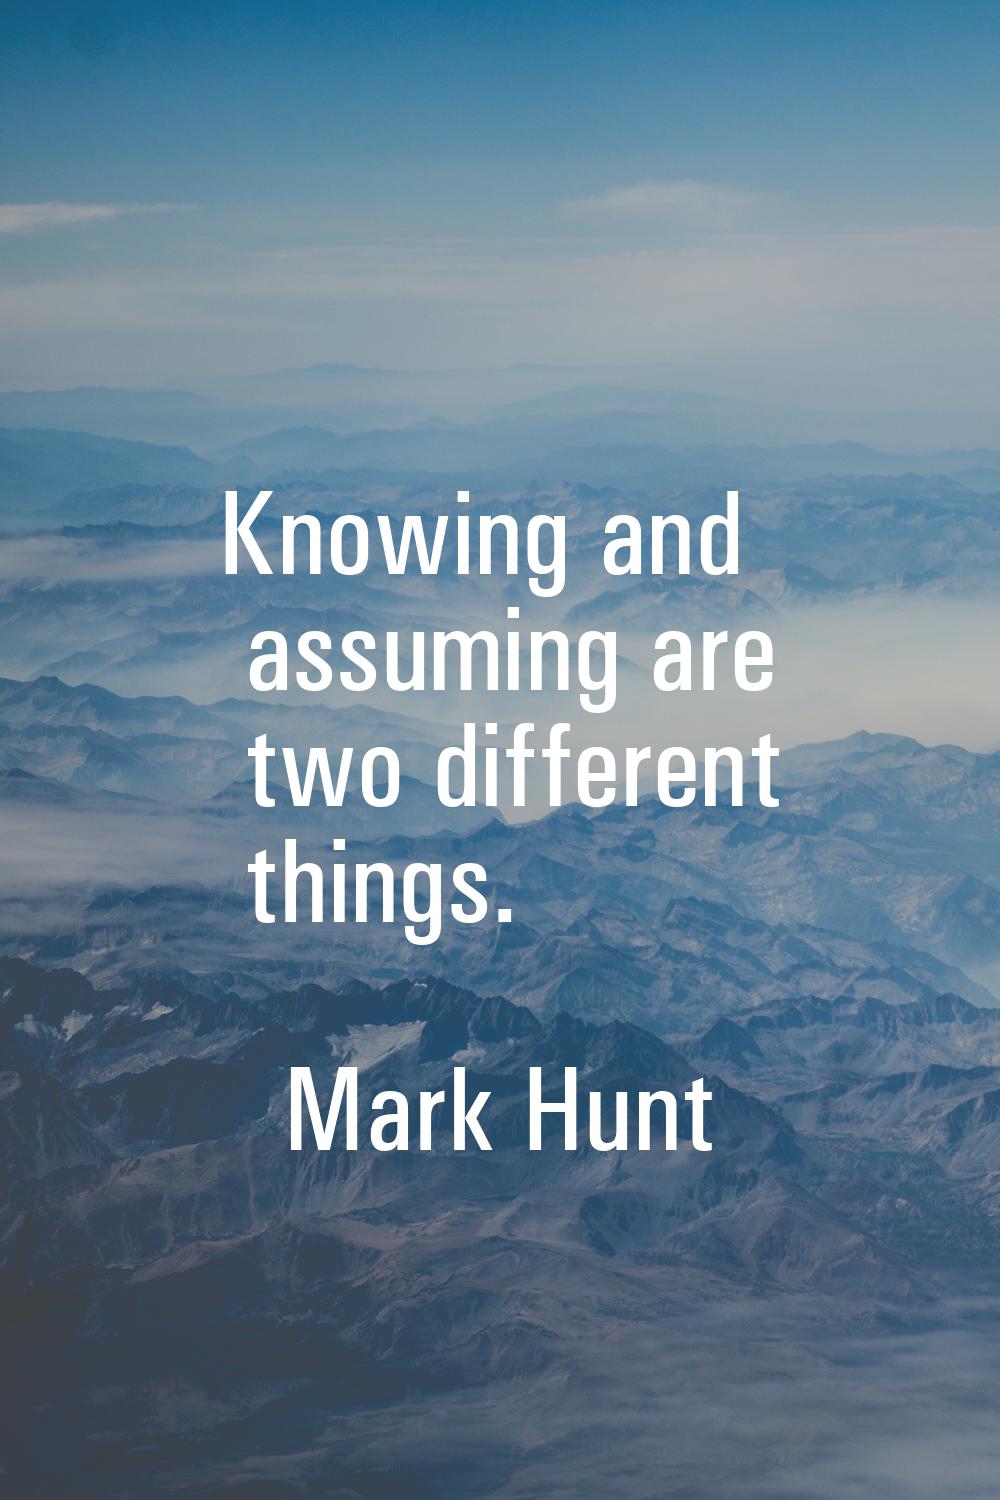 Knowing and assuming are two different things.